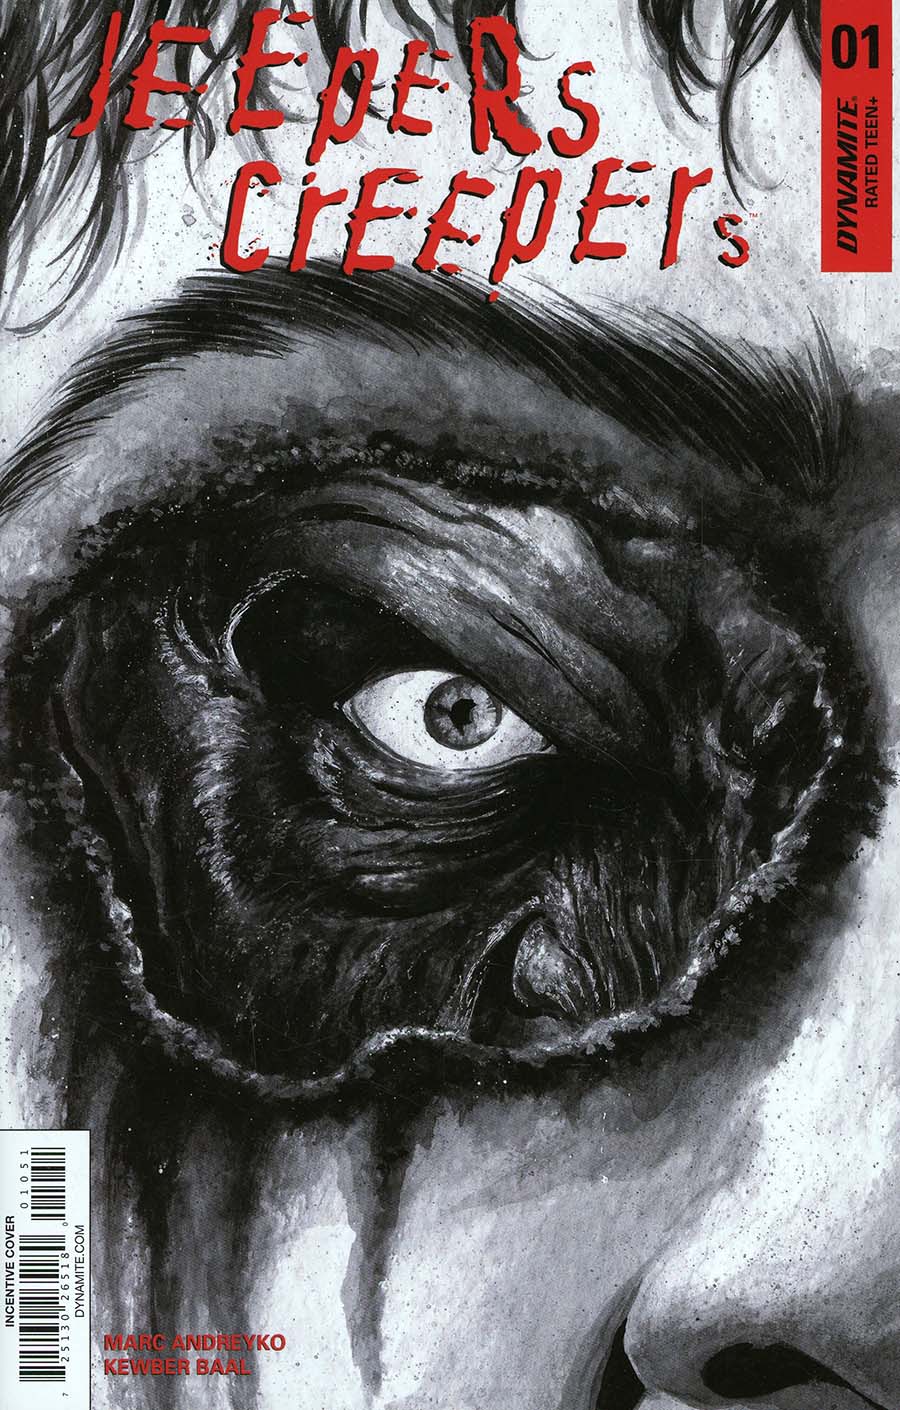 Jeepers Creepers #1 Cover F Incentive Kewber Baal Black & White Cover